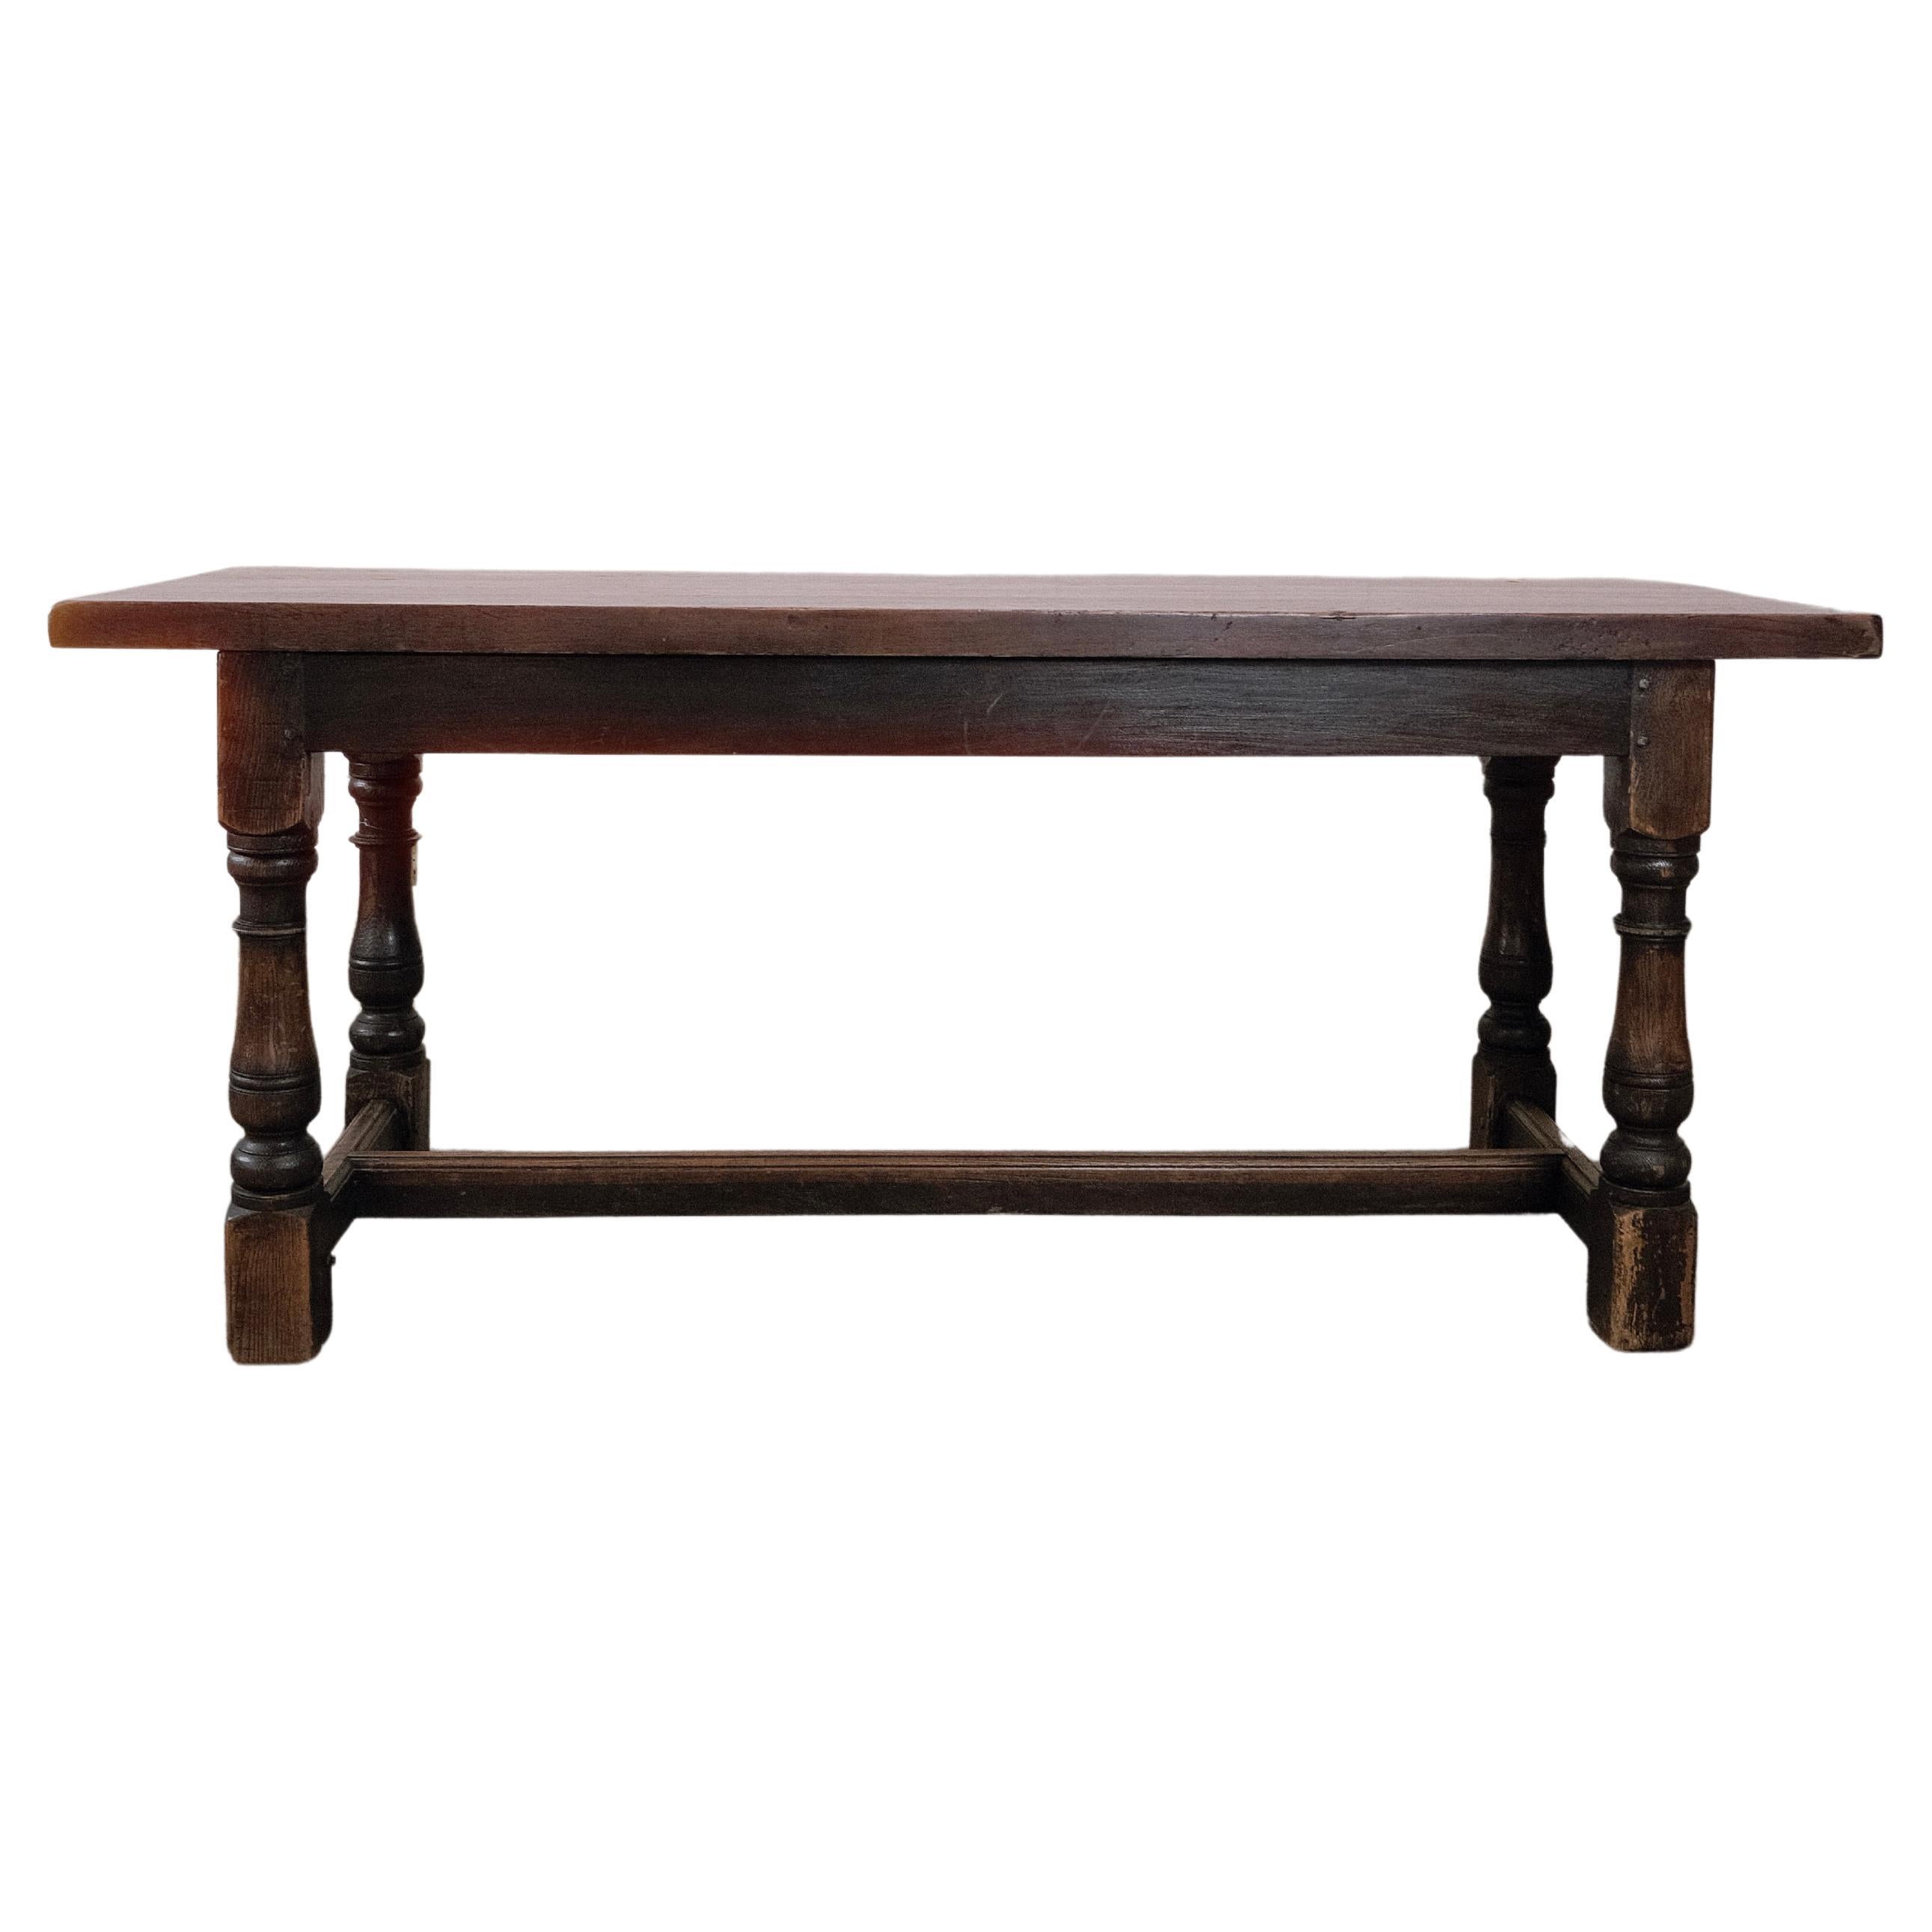 19th-century French Louis Philippe farm table